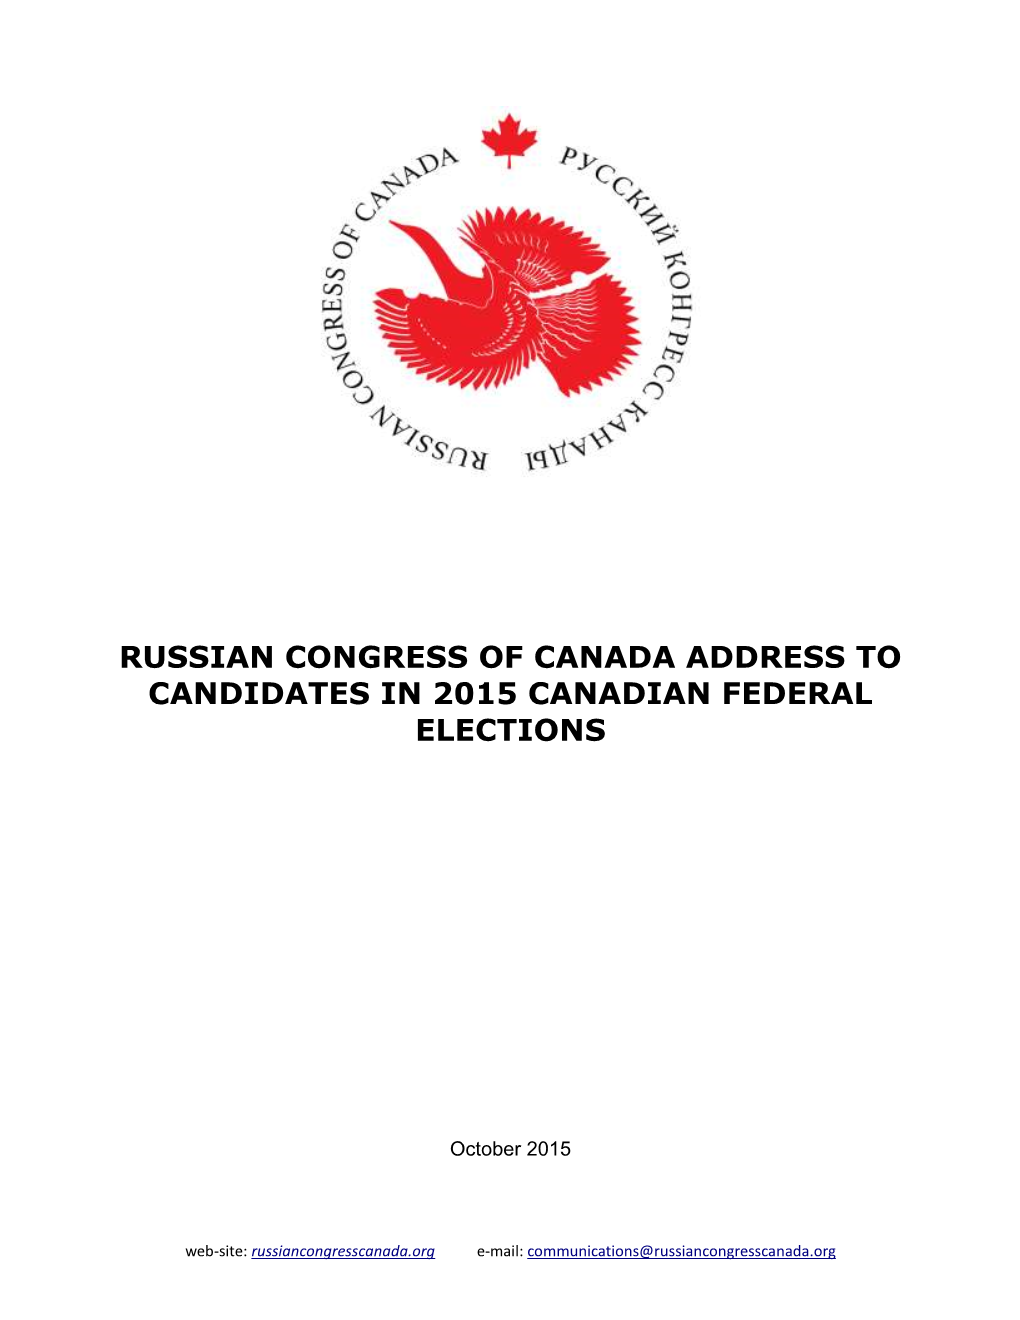 Russian Congress of Canada Address to Candidates in 2015 Canadian Federal Elections